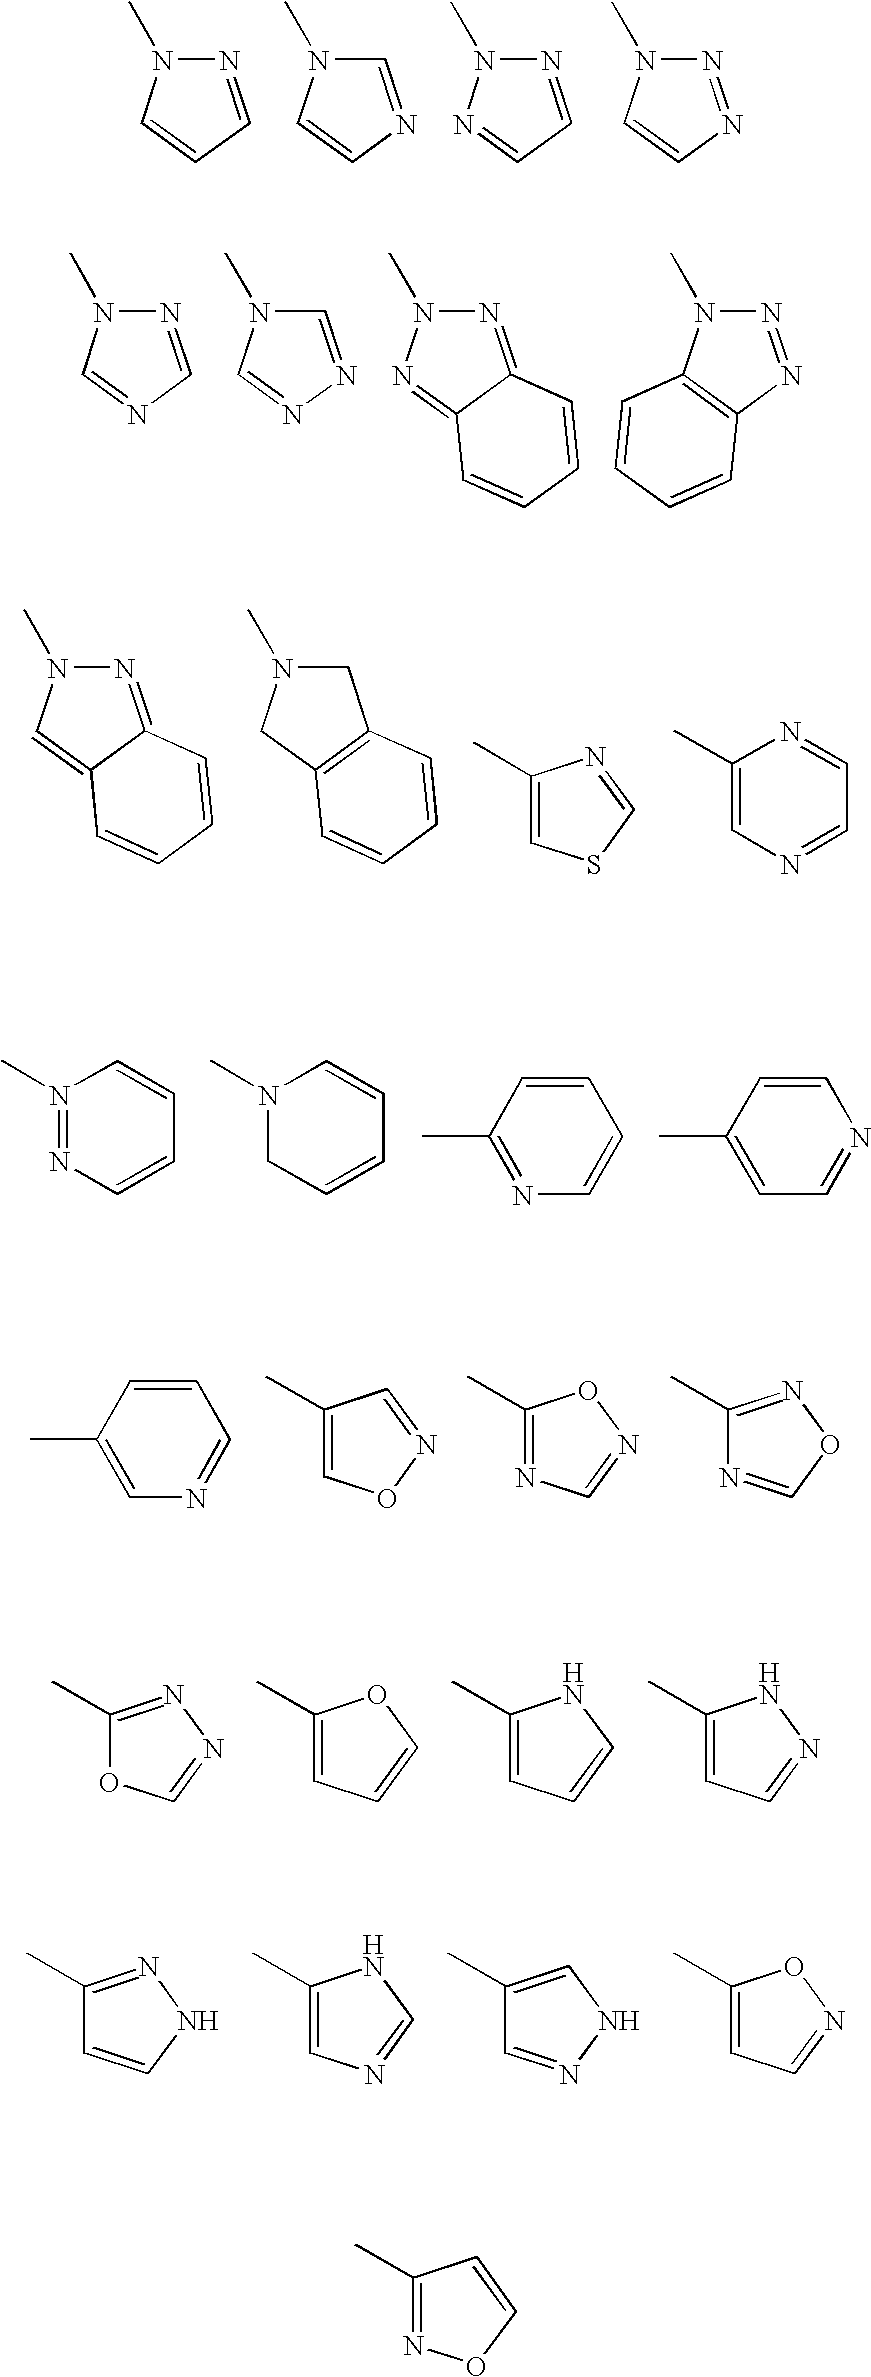 Substituted imidazo-[1,5-a][1,2,4]triazolo[1,5-d][1,4] benzodiazepine derivatives